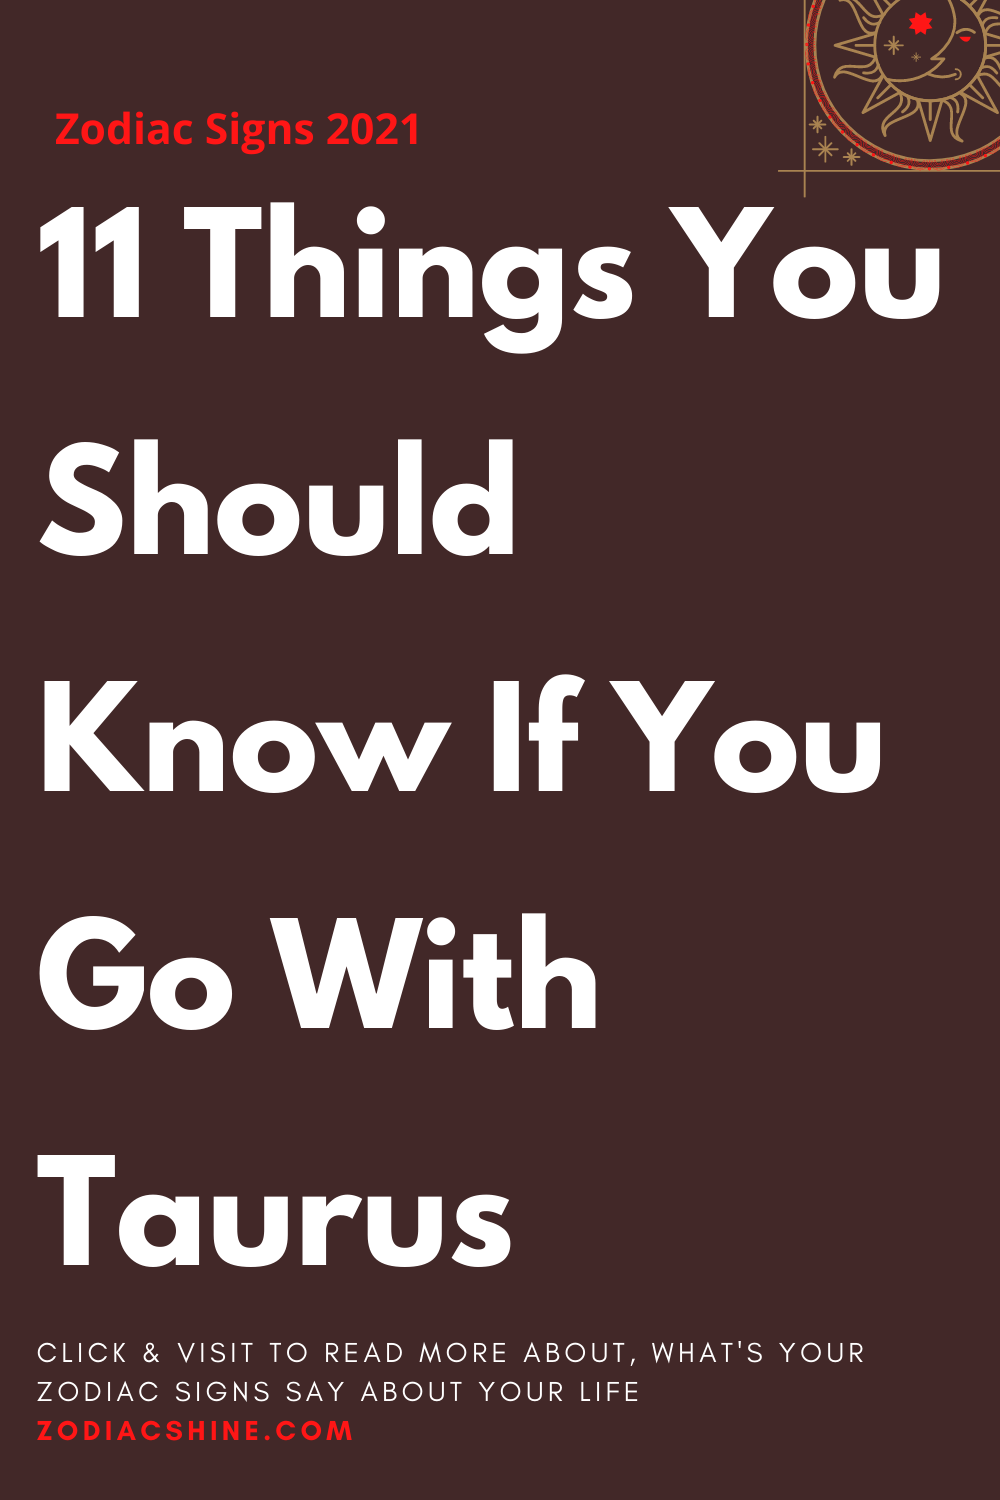 11 Things You Should Know If You Go With Taurus